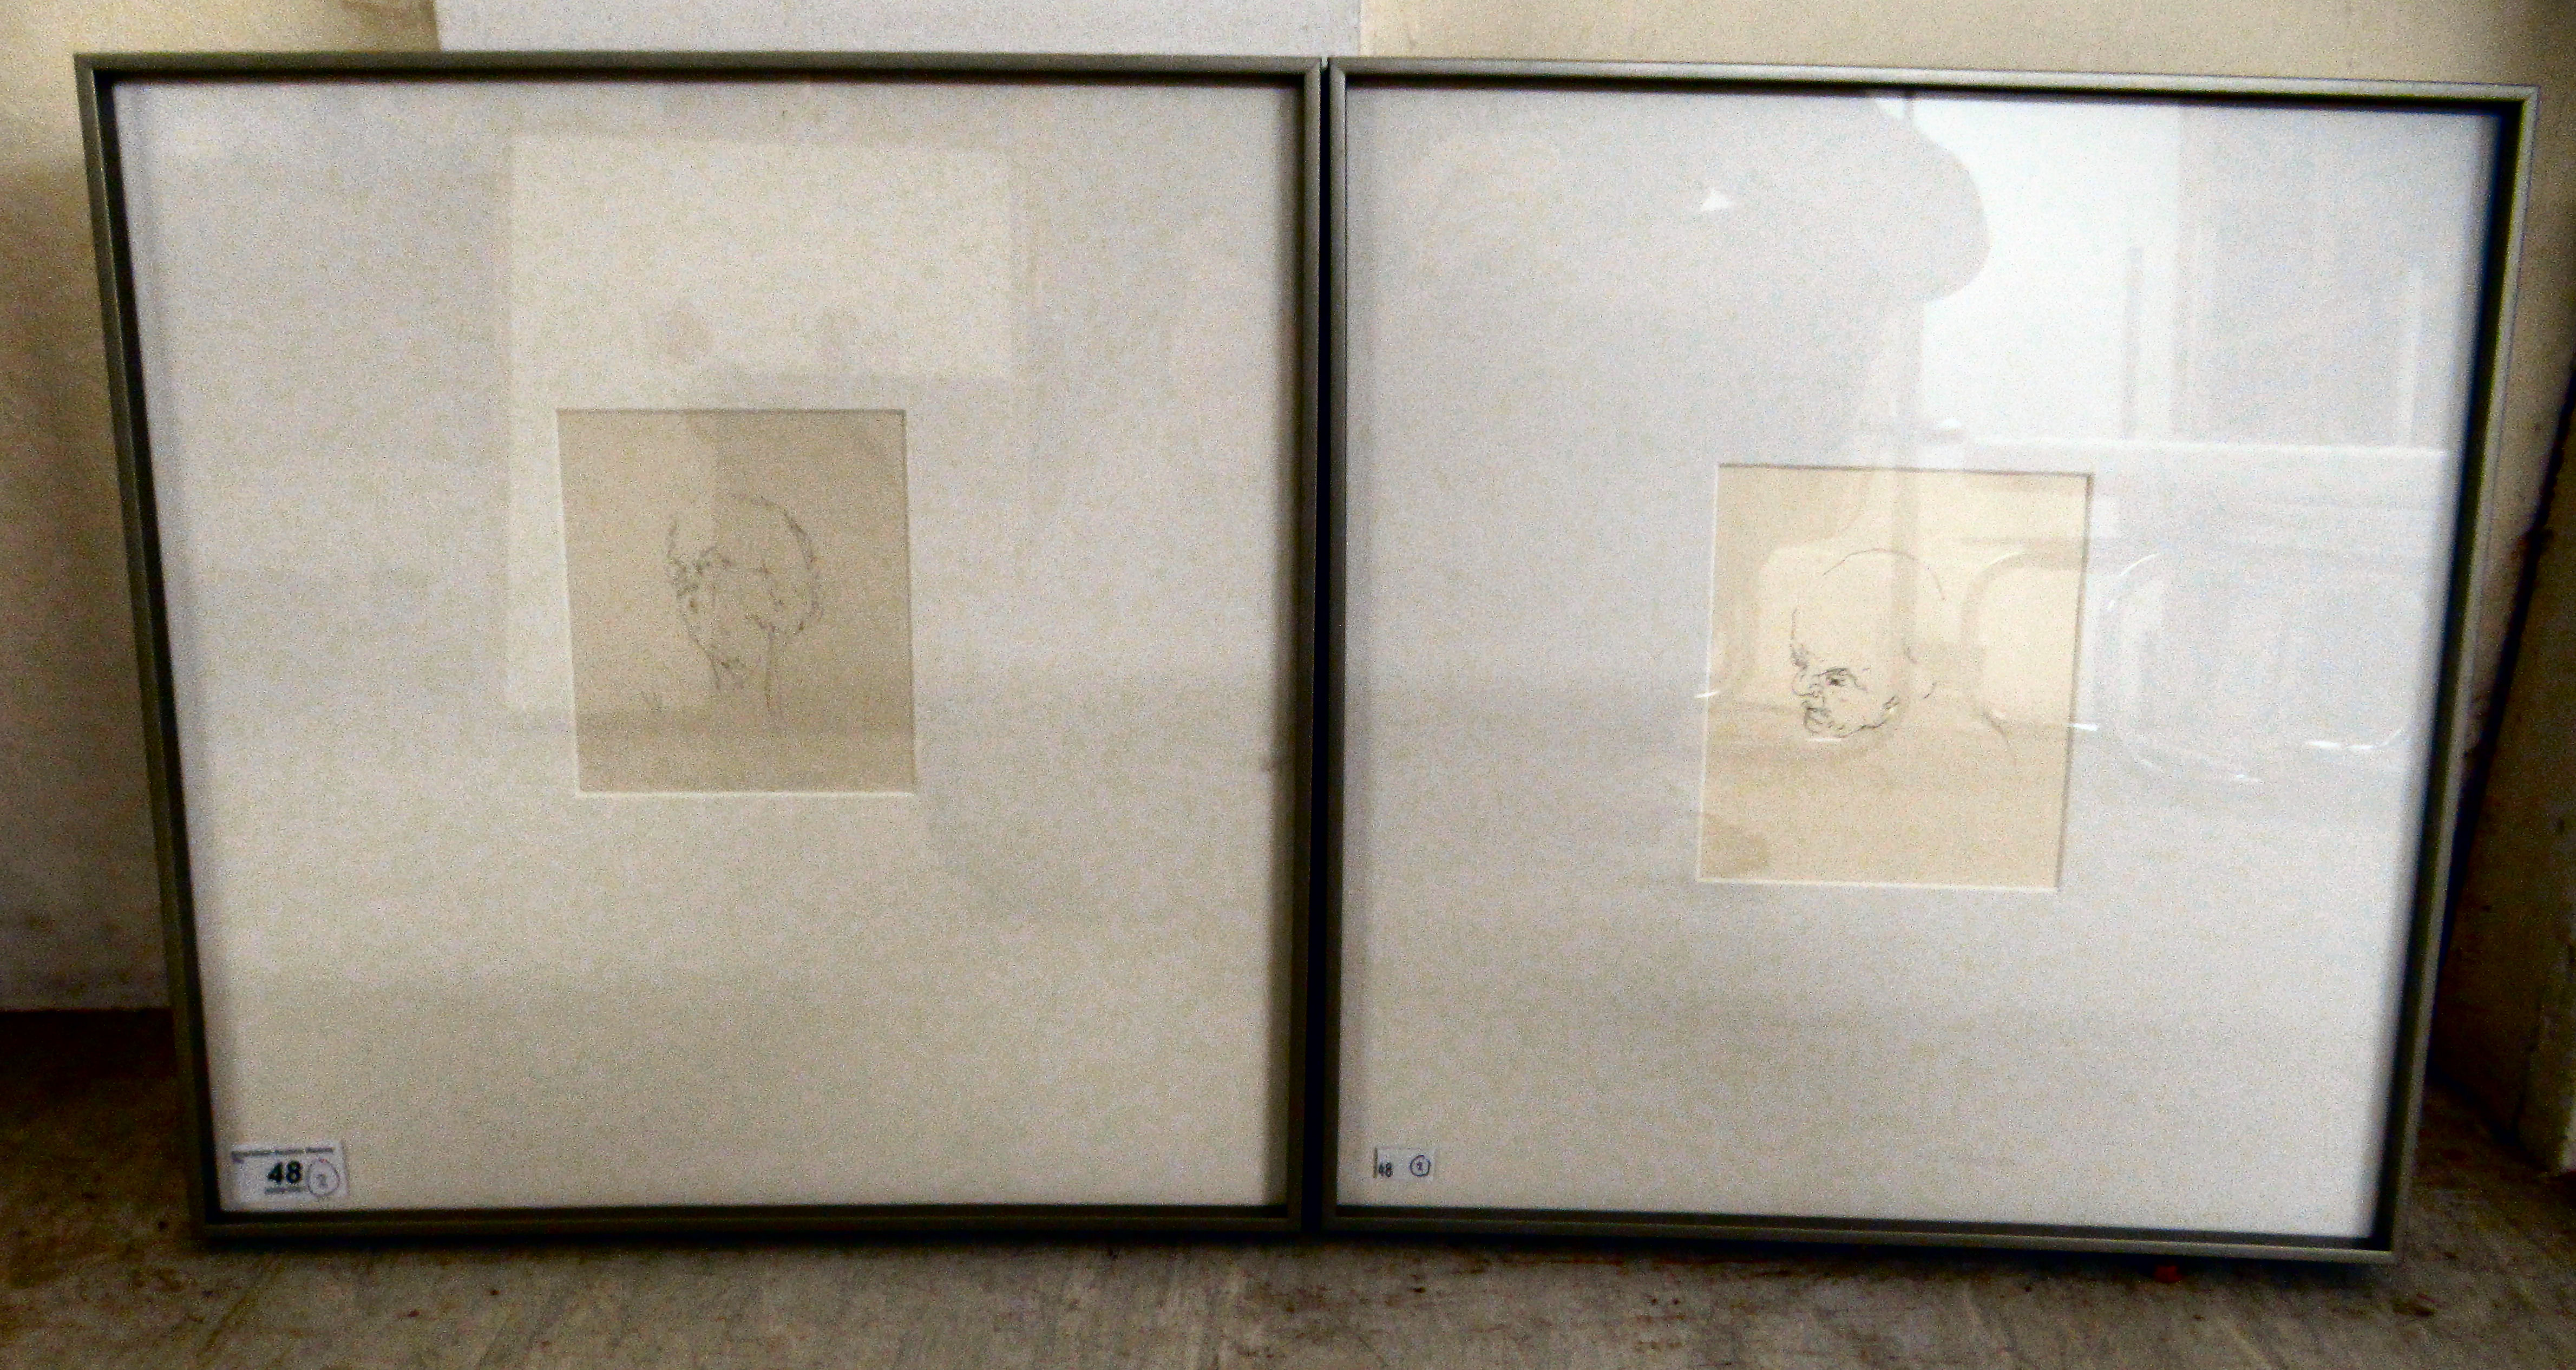 Catherine Watson - 'Stone' and 'Pith'  pen on paper  bears a text verso & dated 2014  5.5" x 4.5"